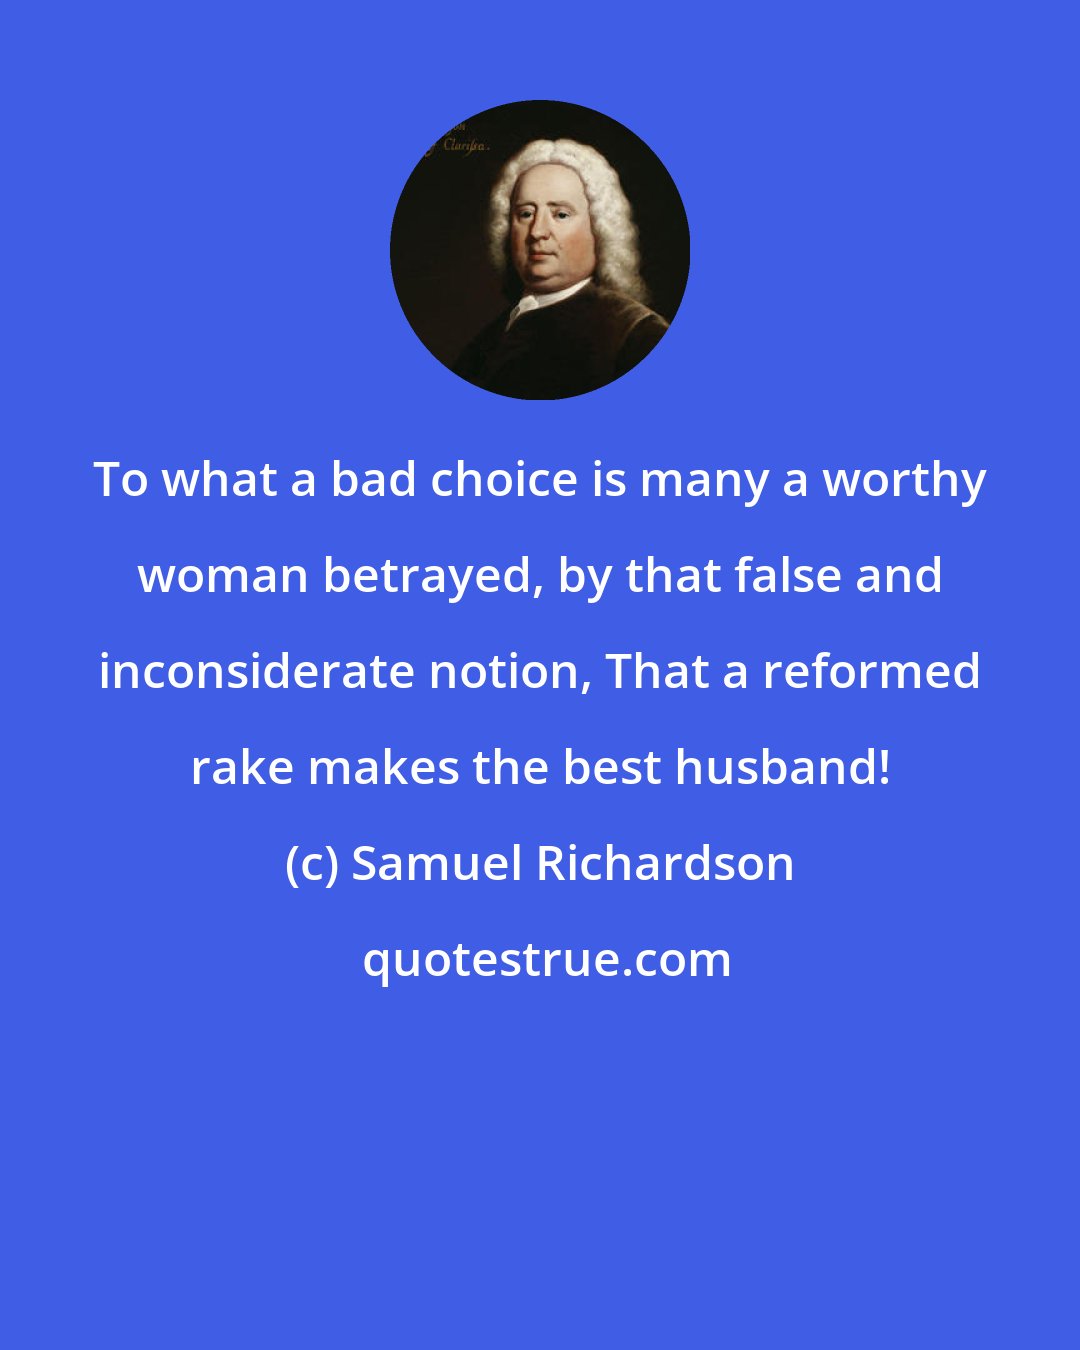 Samuel Richardson: To what a bad choice is many a worthy woman betrayed, by that false and inconsiderate notion, That a reformed rake makes the best husband!